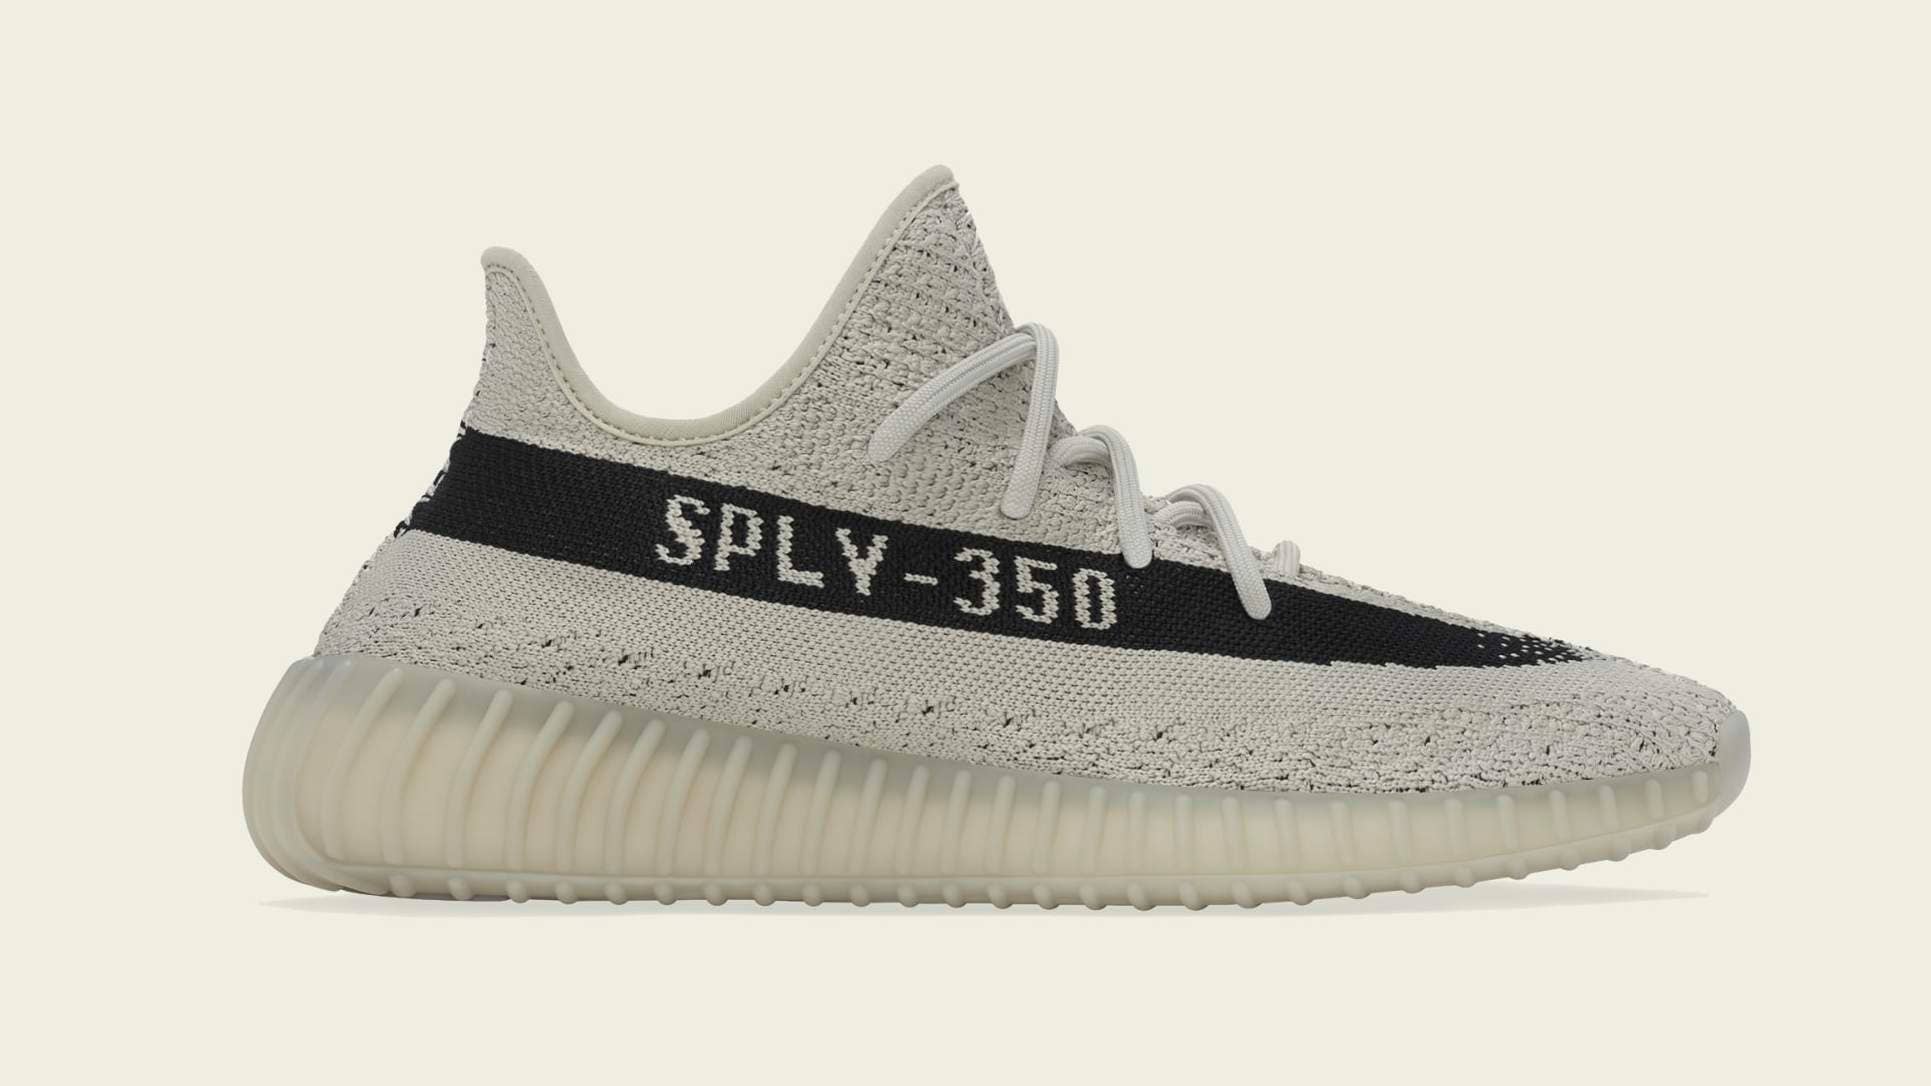 Slate' Adidas Yeezy Boost 350 V2 Releases This Week